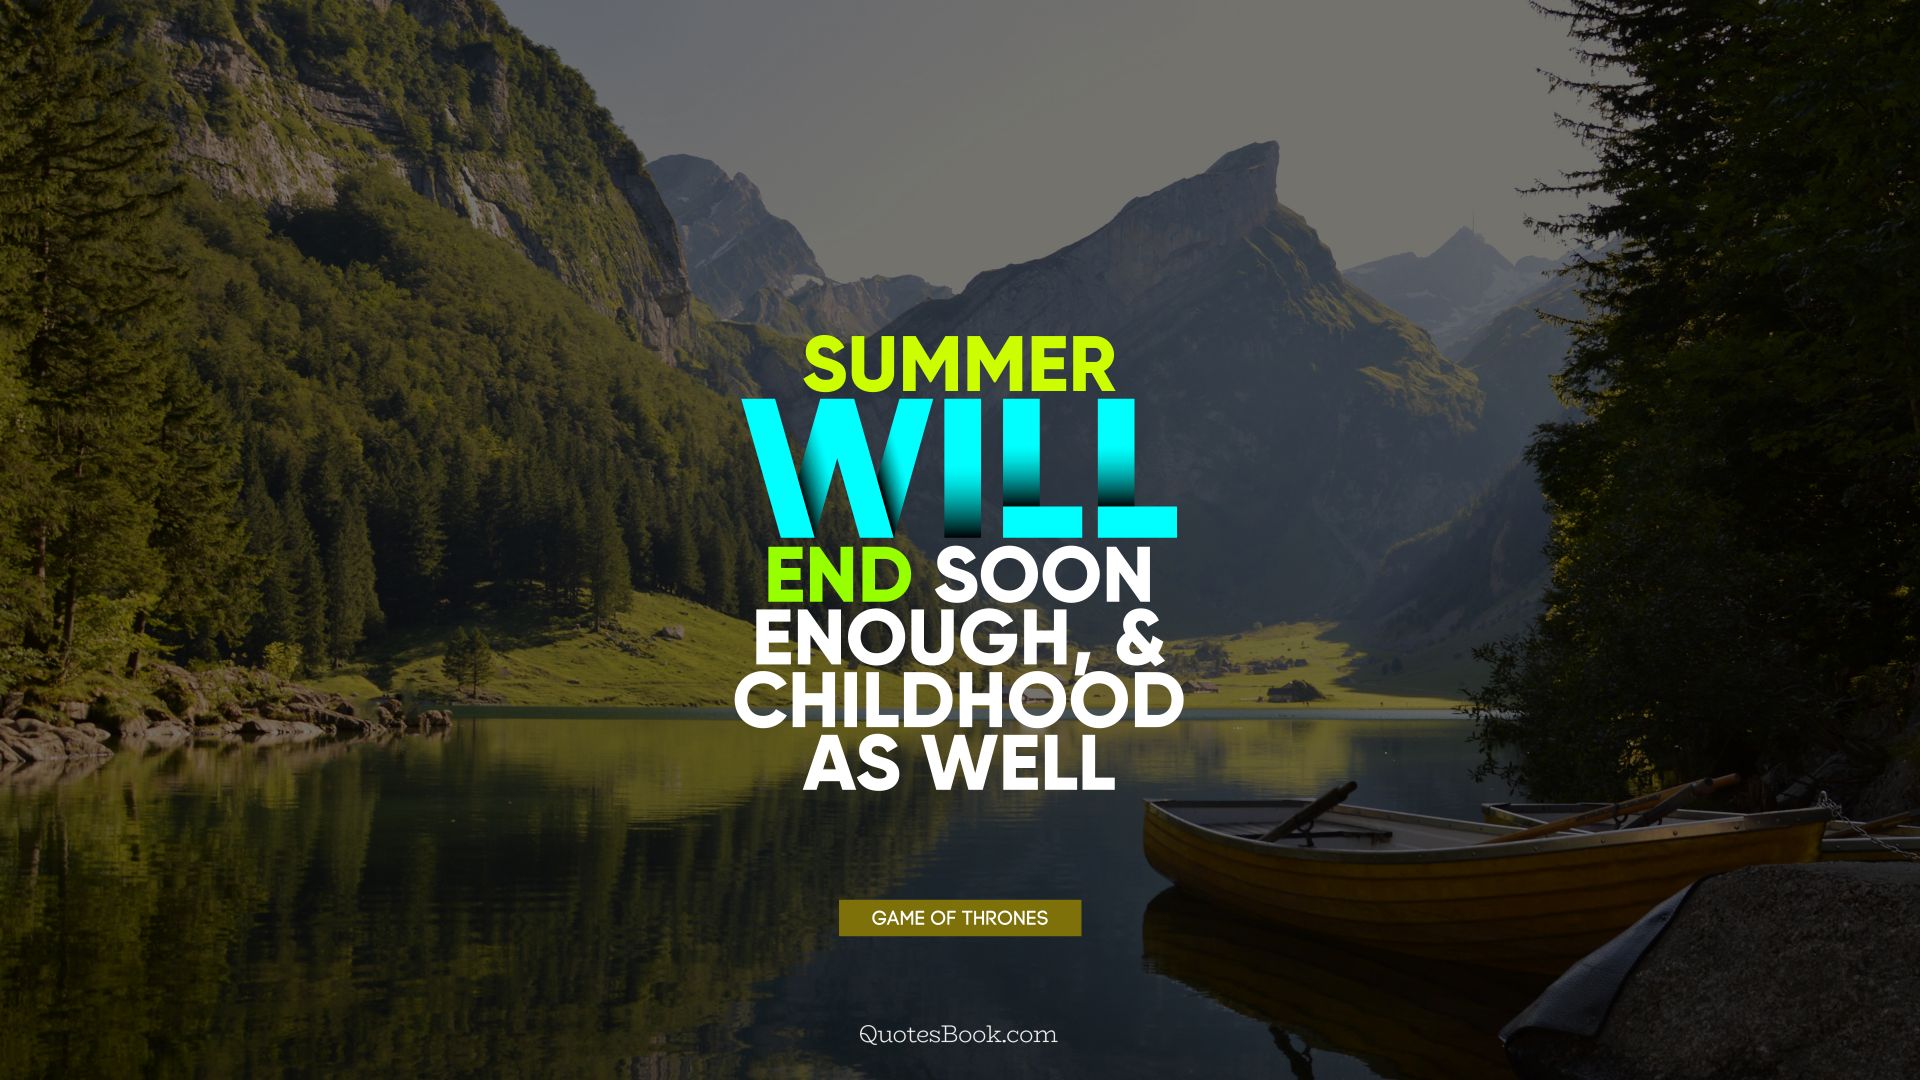 Summer will end soon enough, and childhood as well. - Quote by George R.R. Martin